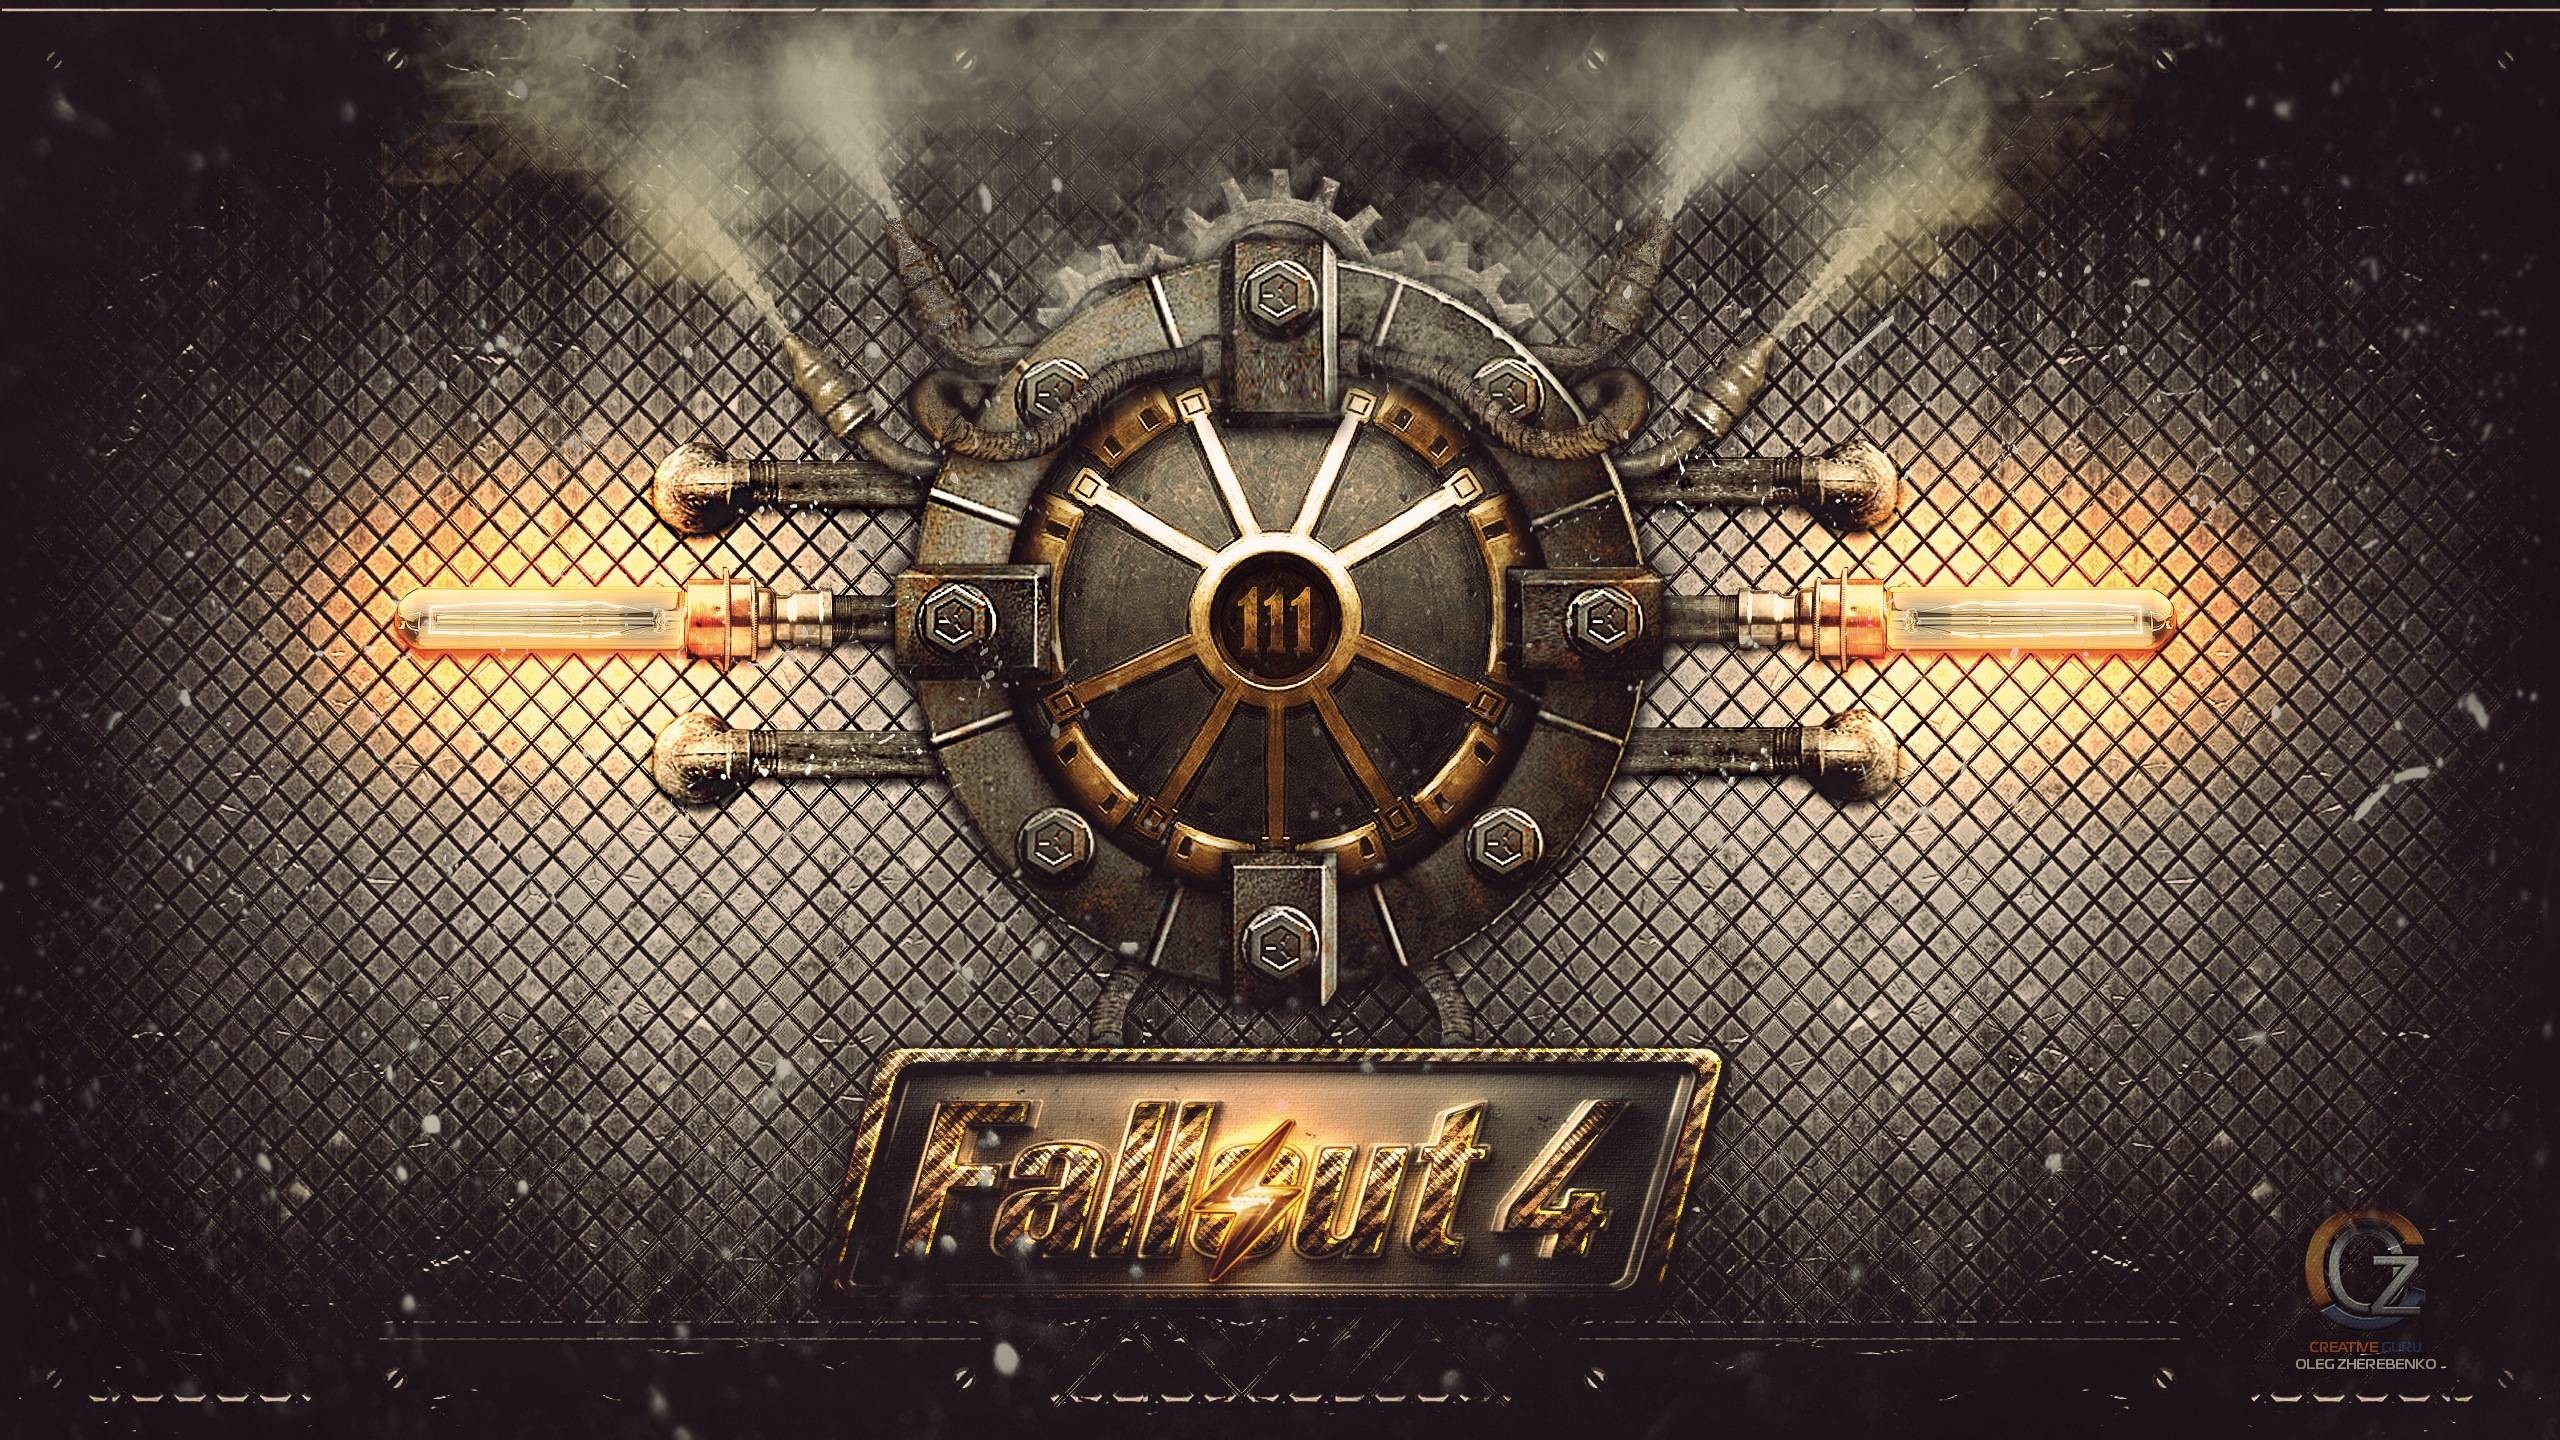 Fallout 4 Wallpapers HD